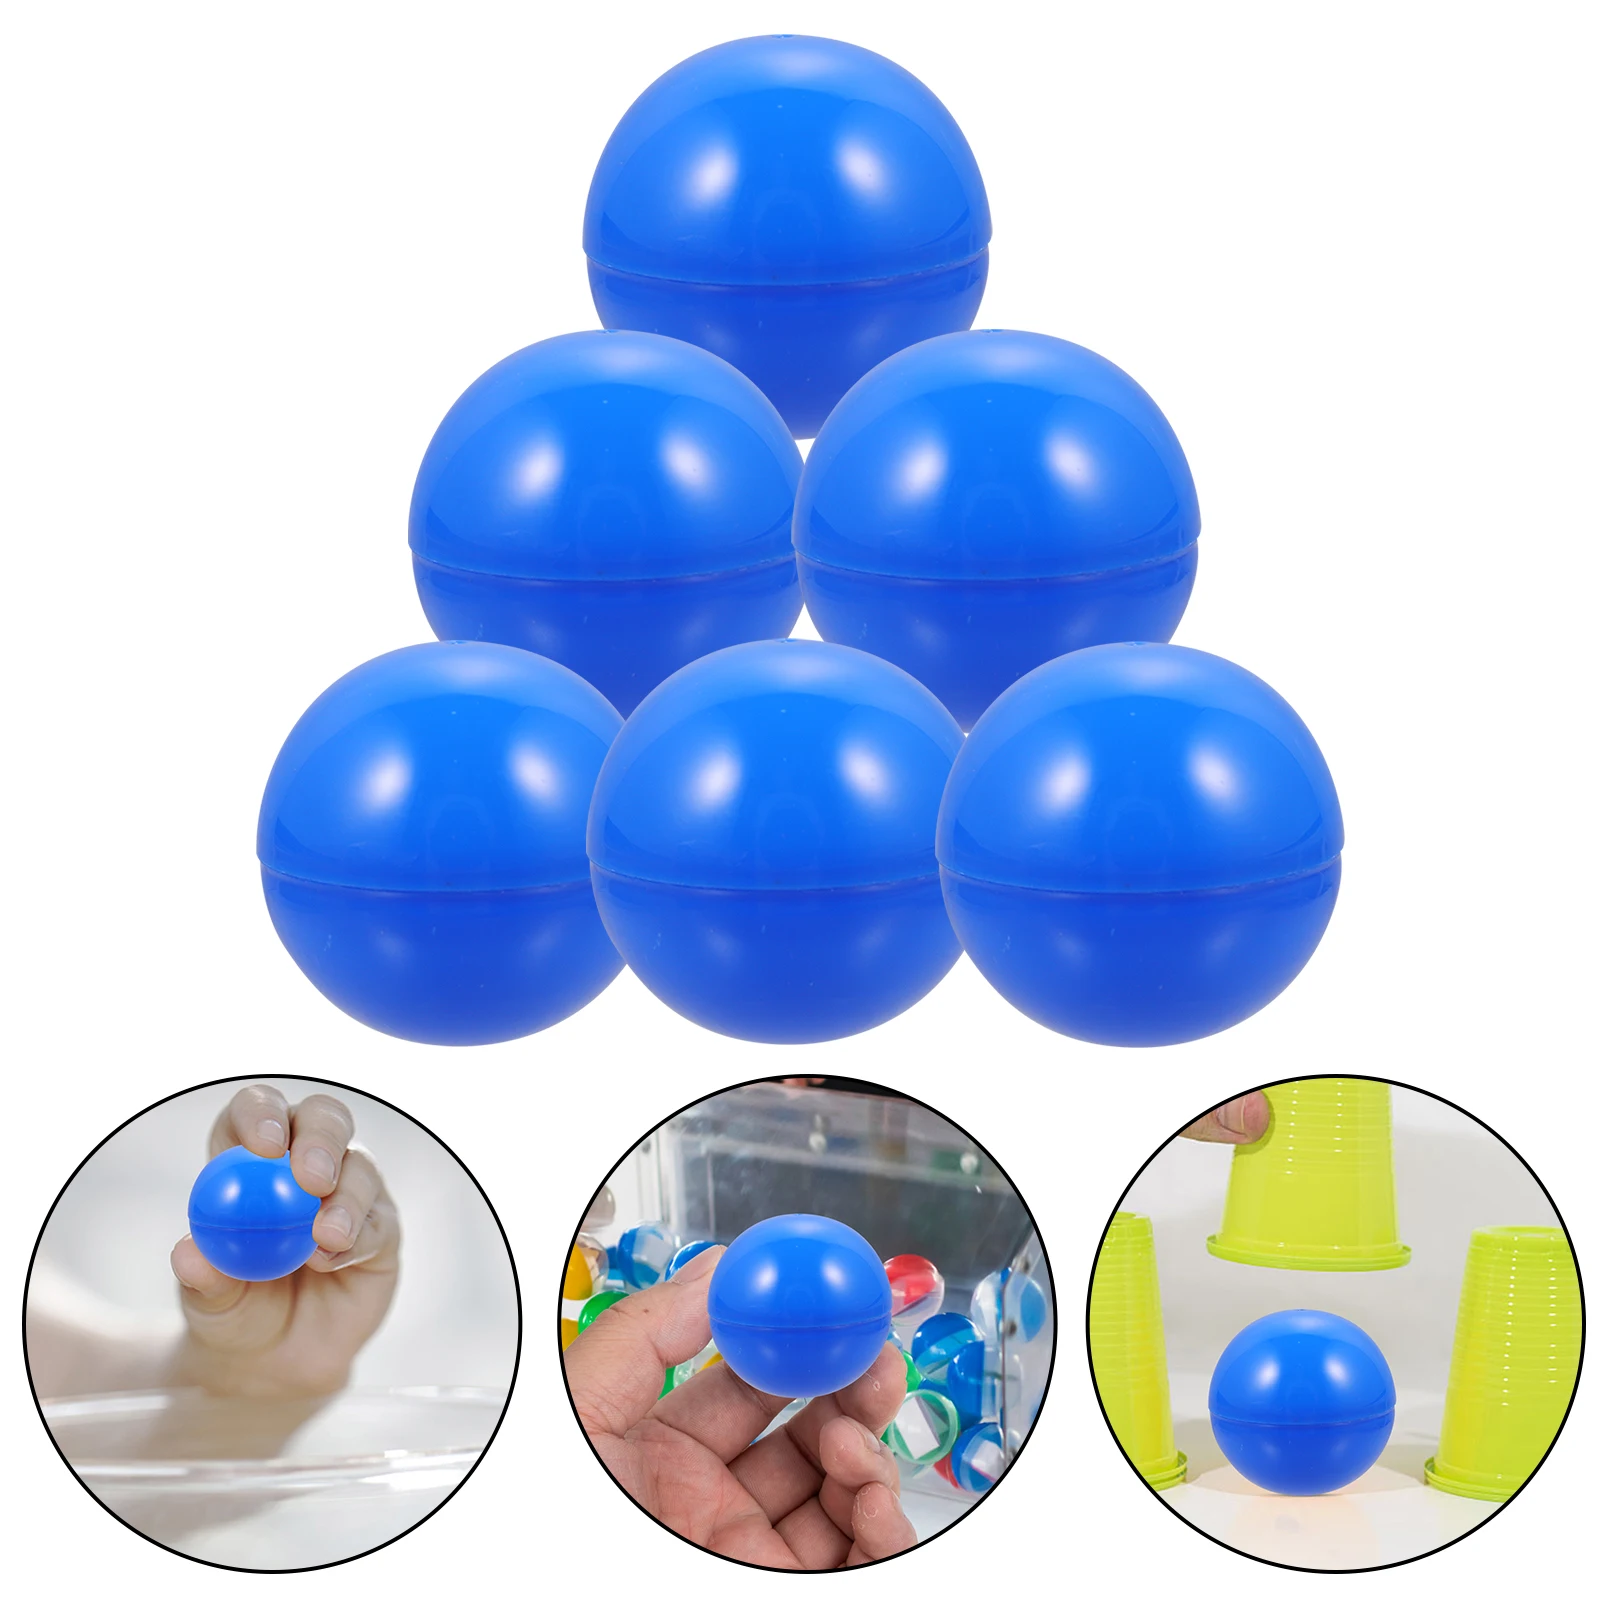 

25pcs Lottery Balls Plastic Hollow Ball Table Activity Balls Pong Balls Game Party Motion Lottery Ball Decoration 40mm Diameter